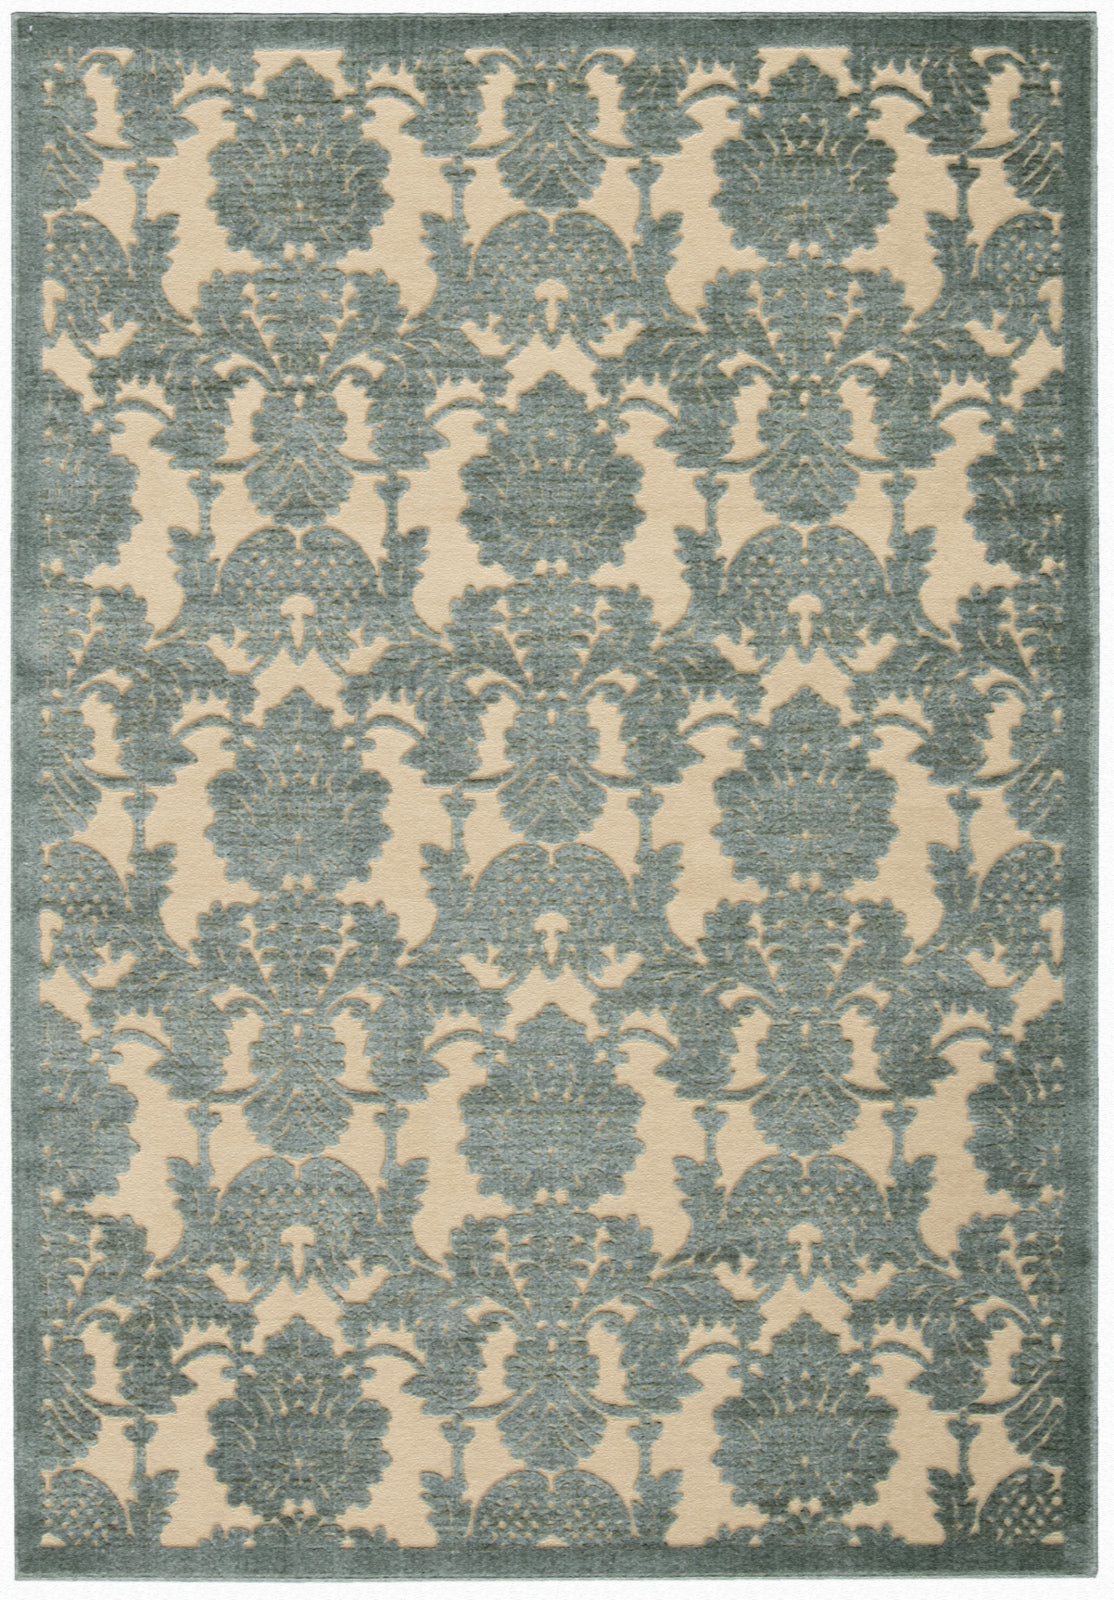 Nourison Graphic Illusions GIL03 Teal Area Rug main image